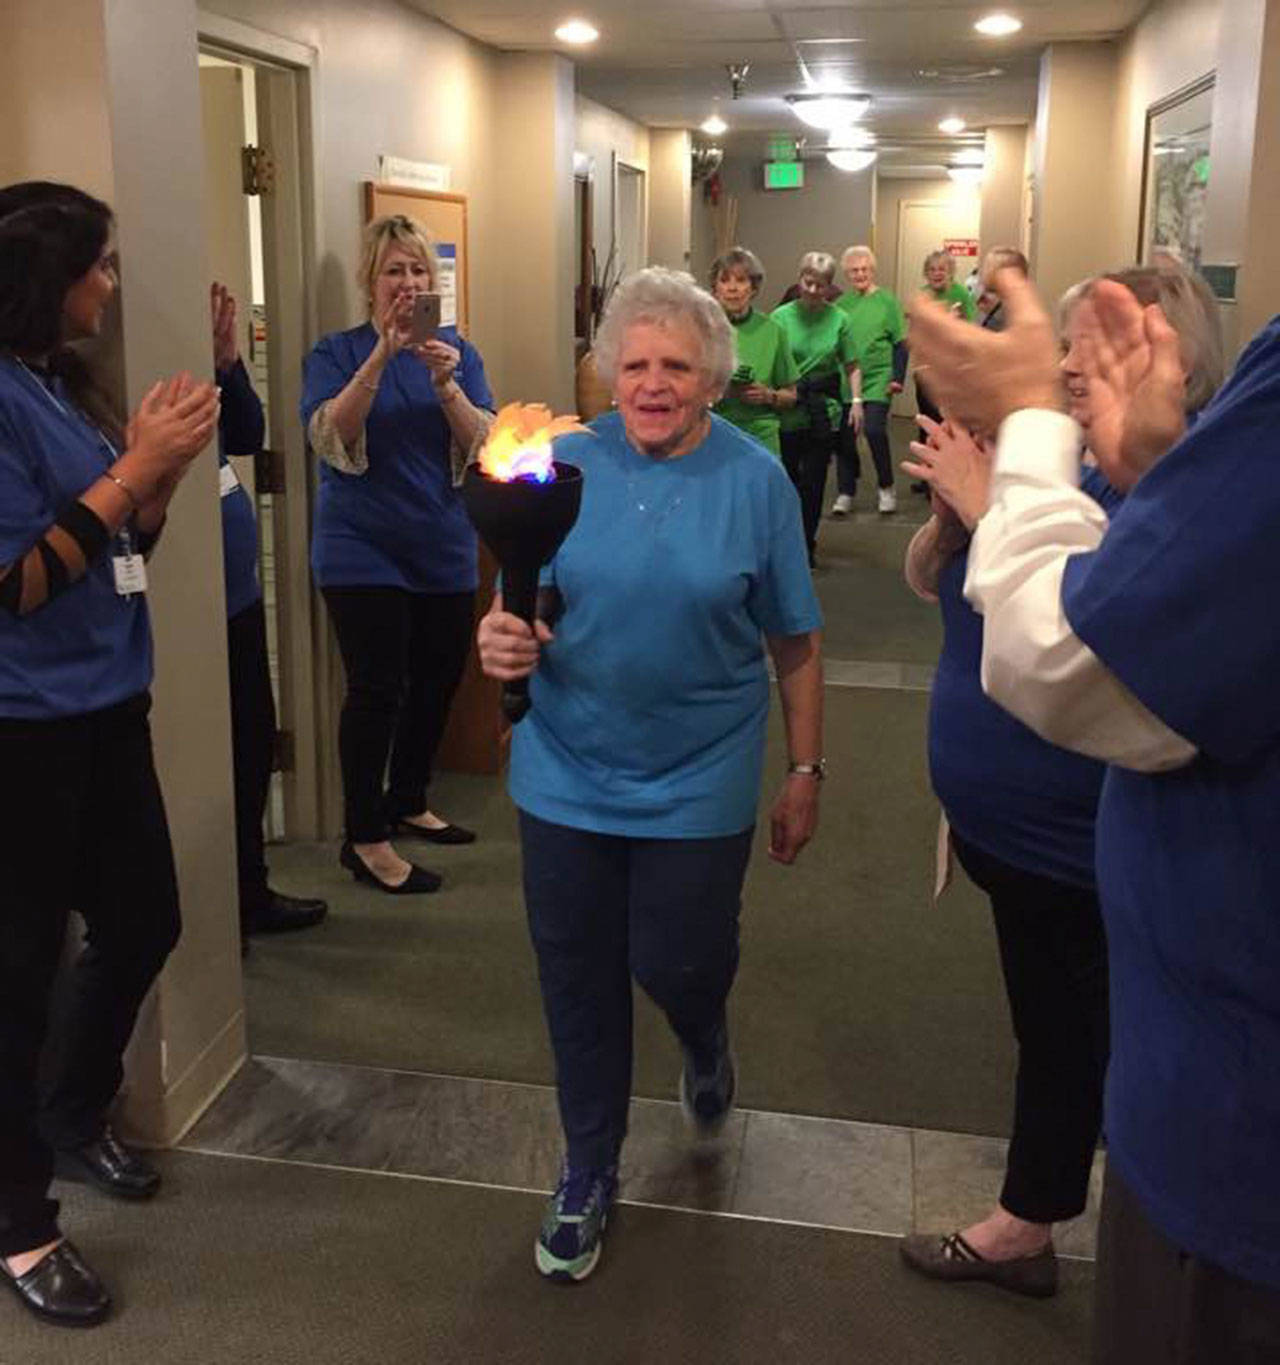 Residents and staff participate in the opening ceremony of the 2018 Shores Winter Olympics, encouraging fitness and health in the Covenant Shores retirement community. Photo courtesy of Janet Robinson